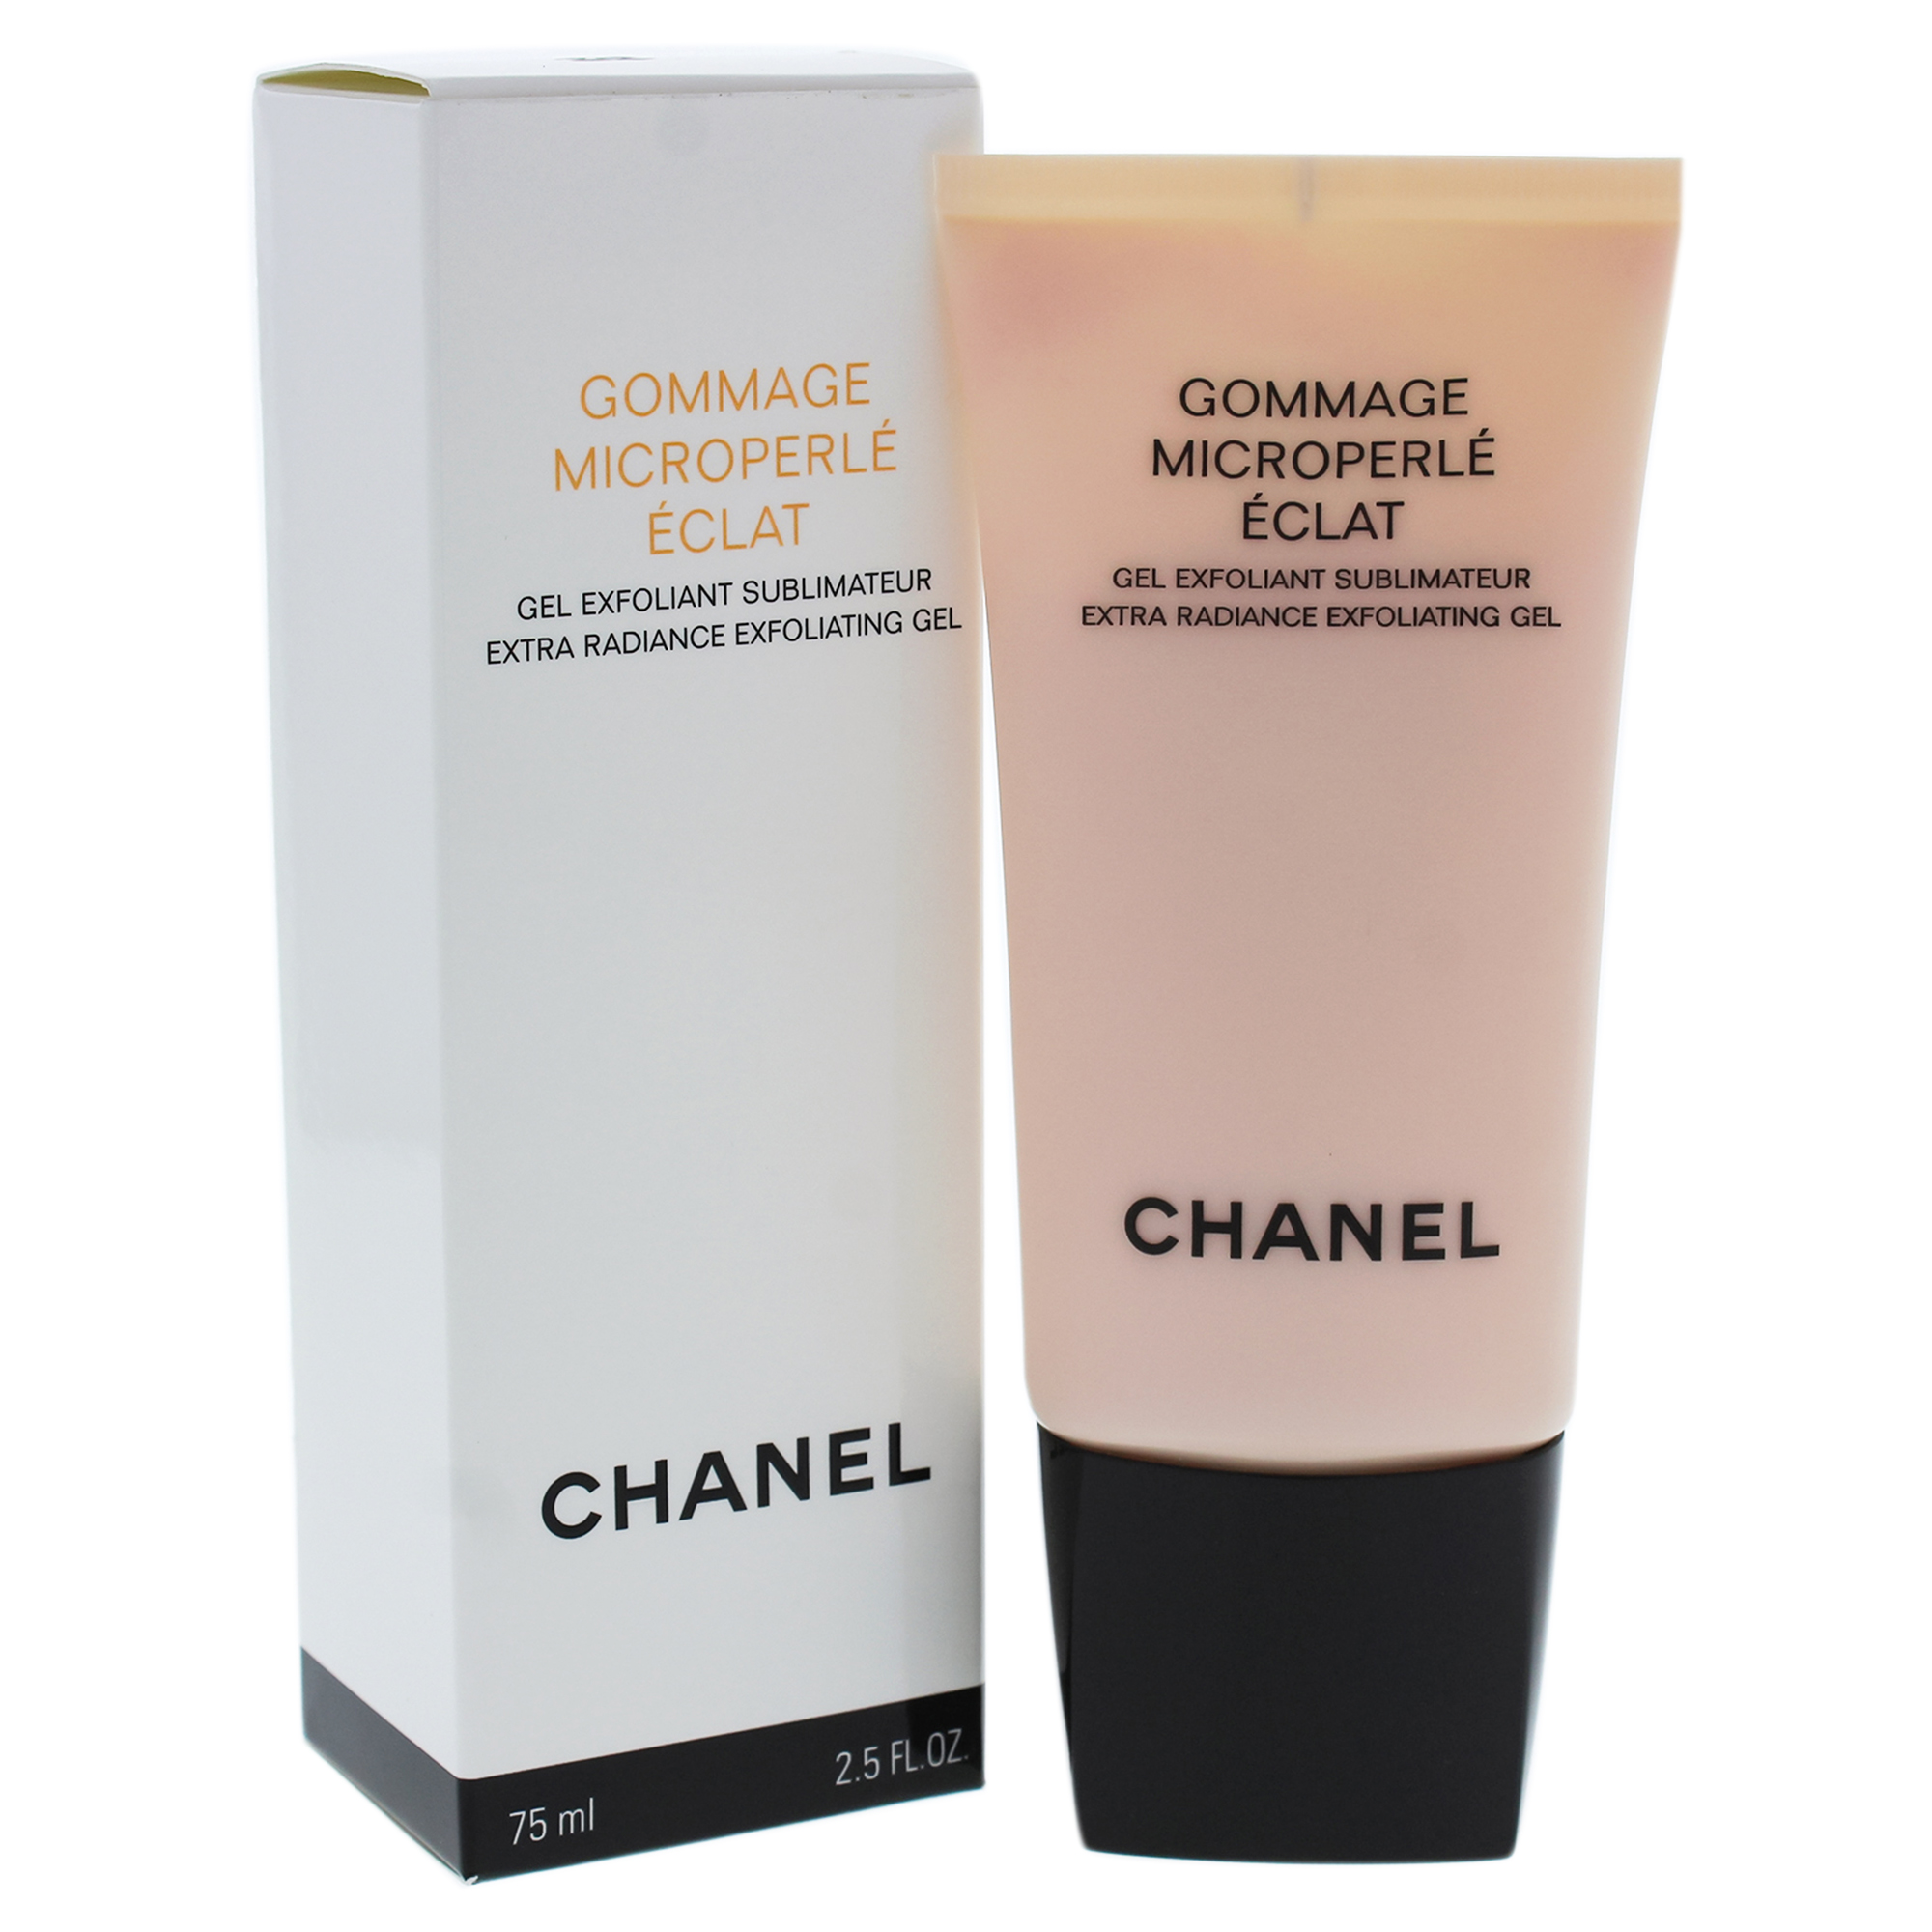 Gommage Extra Radiance Exfoliating Hair Gel By Chanel - 2.5 Oz